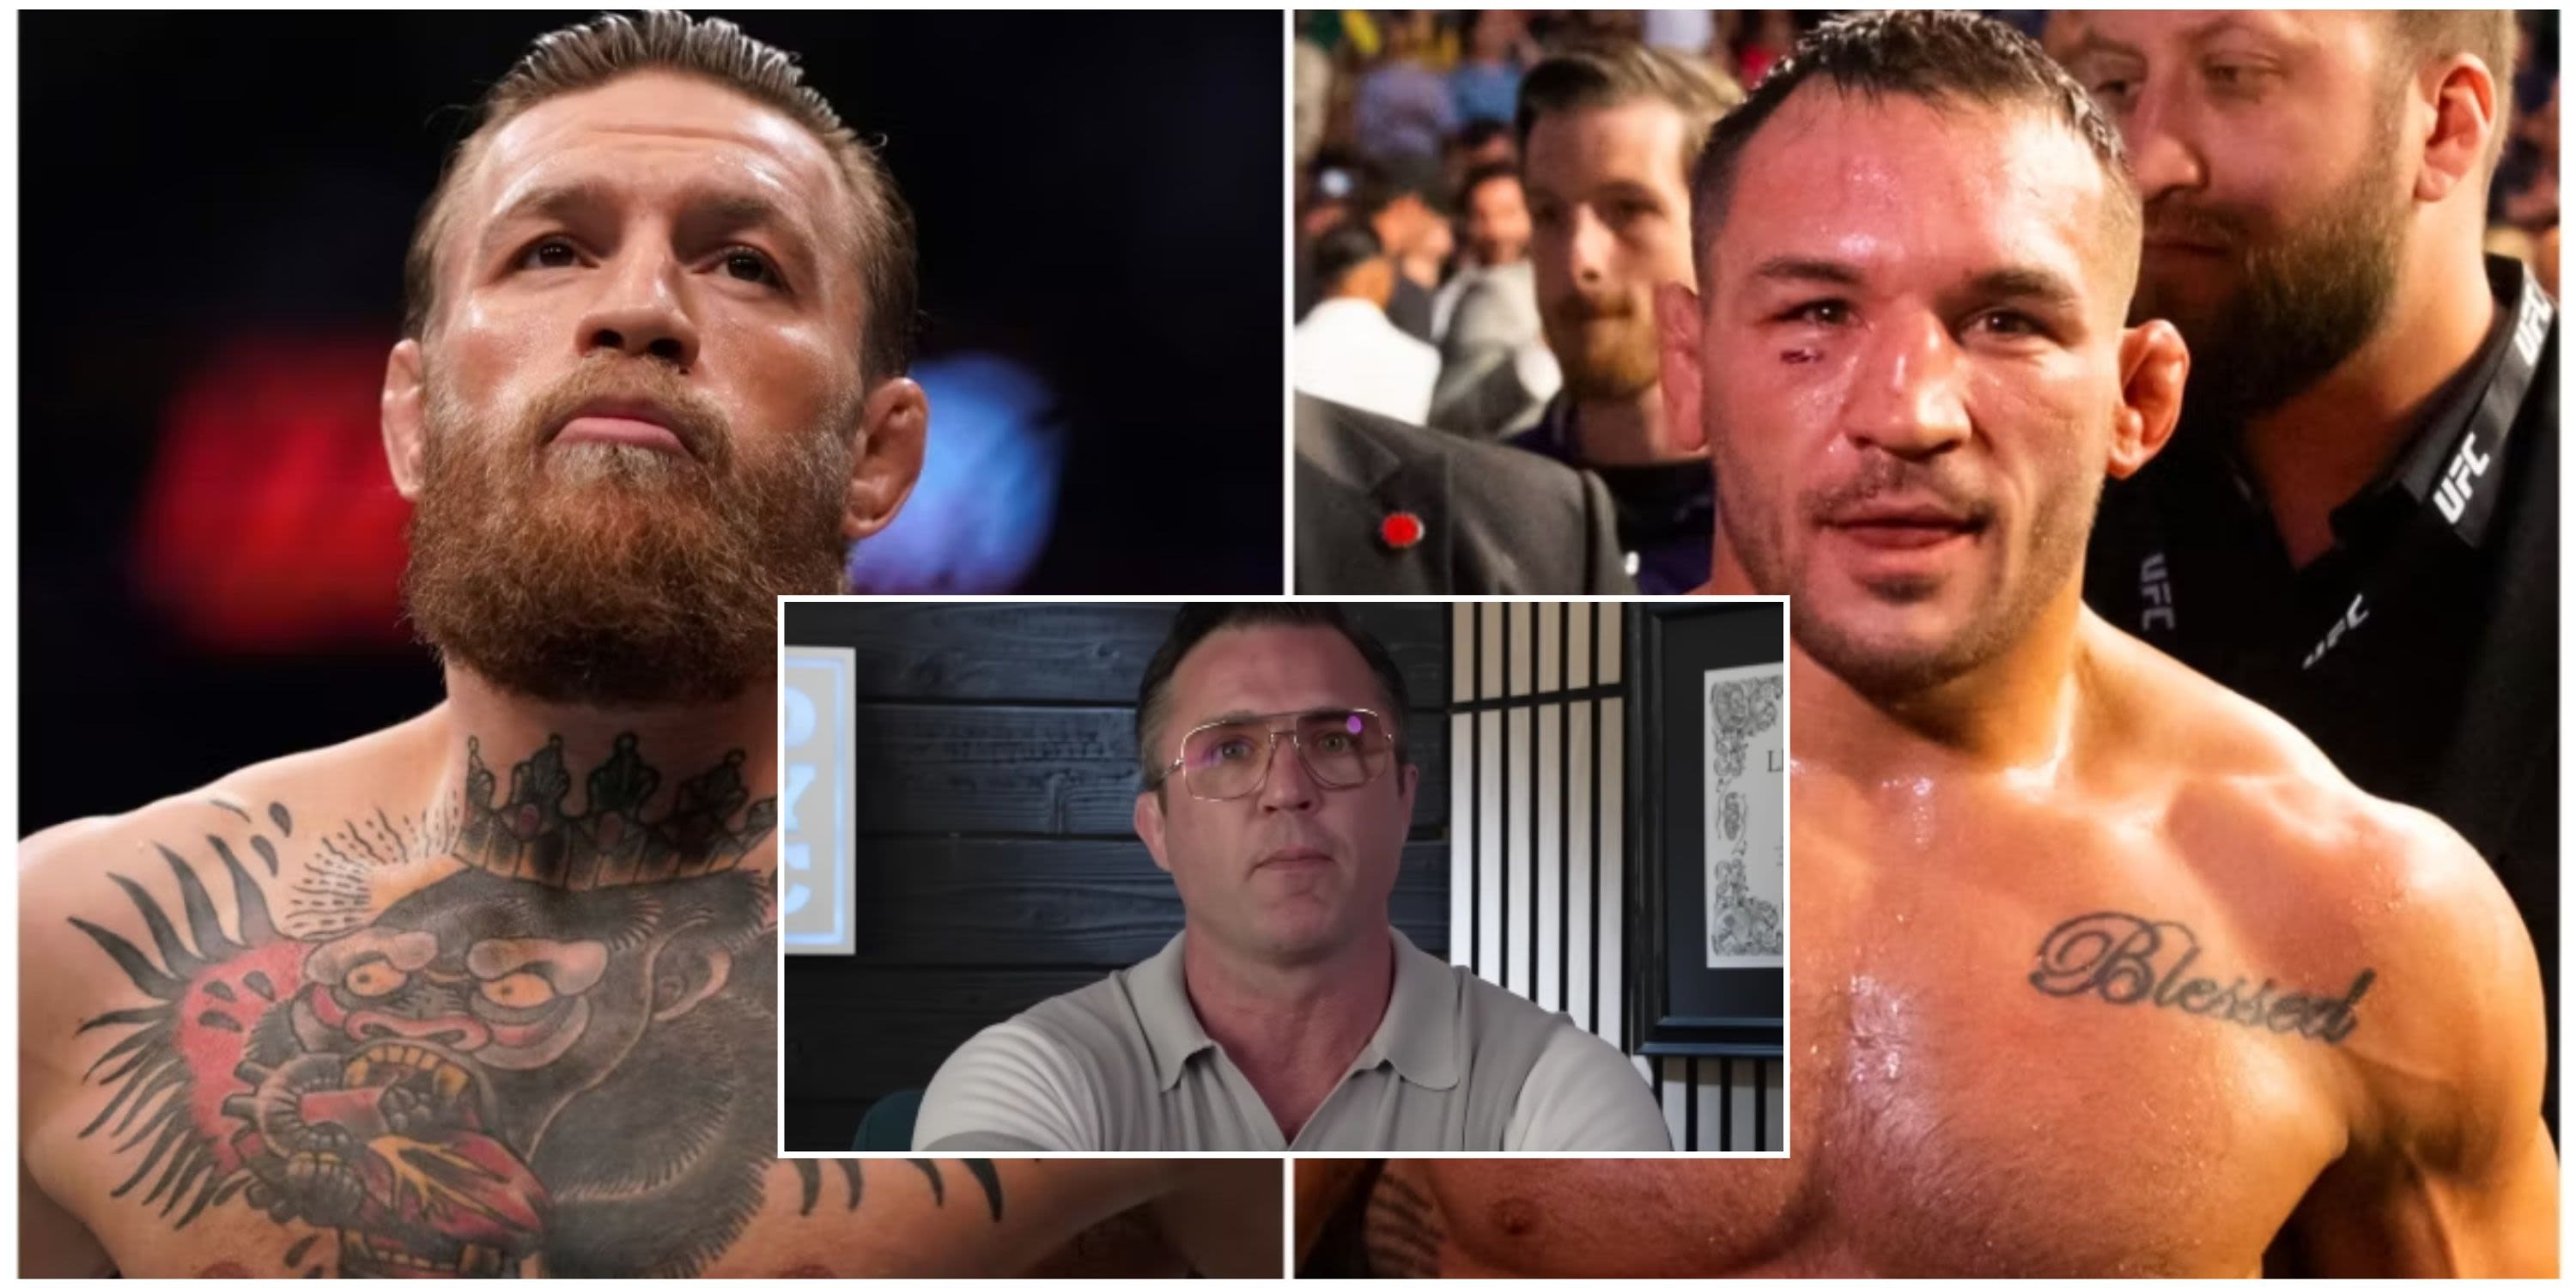 Chael Sonnen heavily backing Michael Chandler against Conor McGregor